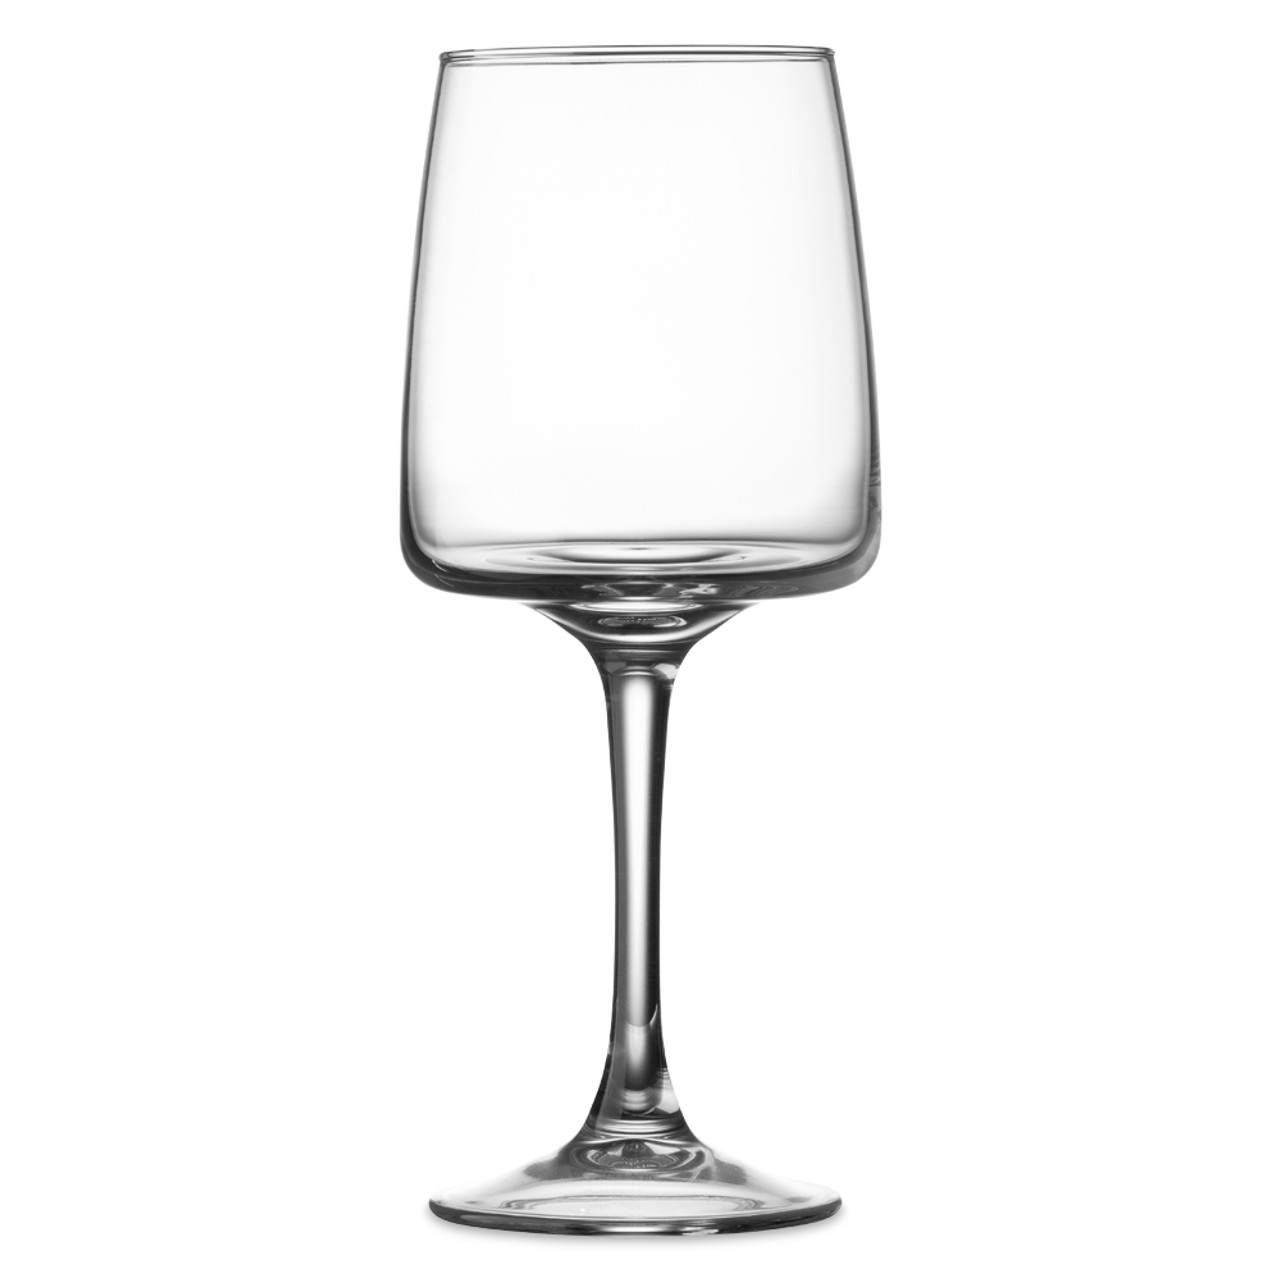 https://cdn11.bigcommerce.com/s-cznxq08r7/images/stencil/1280x1280/products/5135/14111/HGV4404-006-Edel_Wine_Cocktail_Beer_Stemmed_Glass_-_11.75_oz-03__56692.1636566013.jpg?c=1